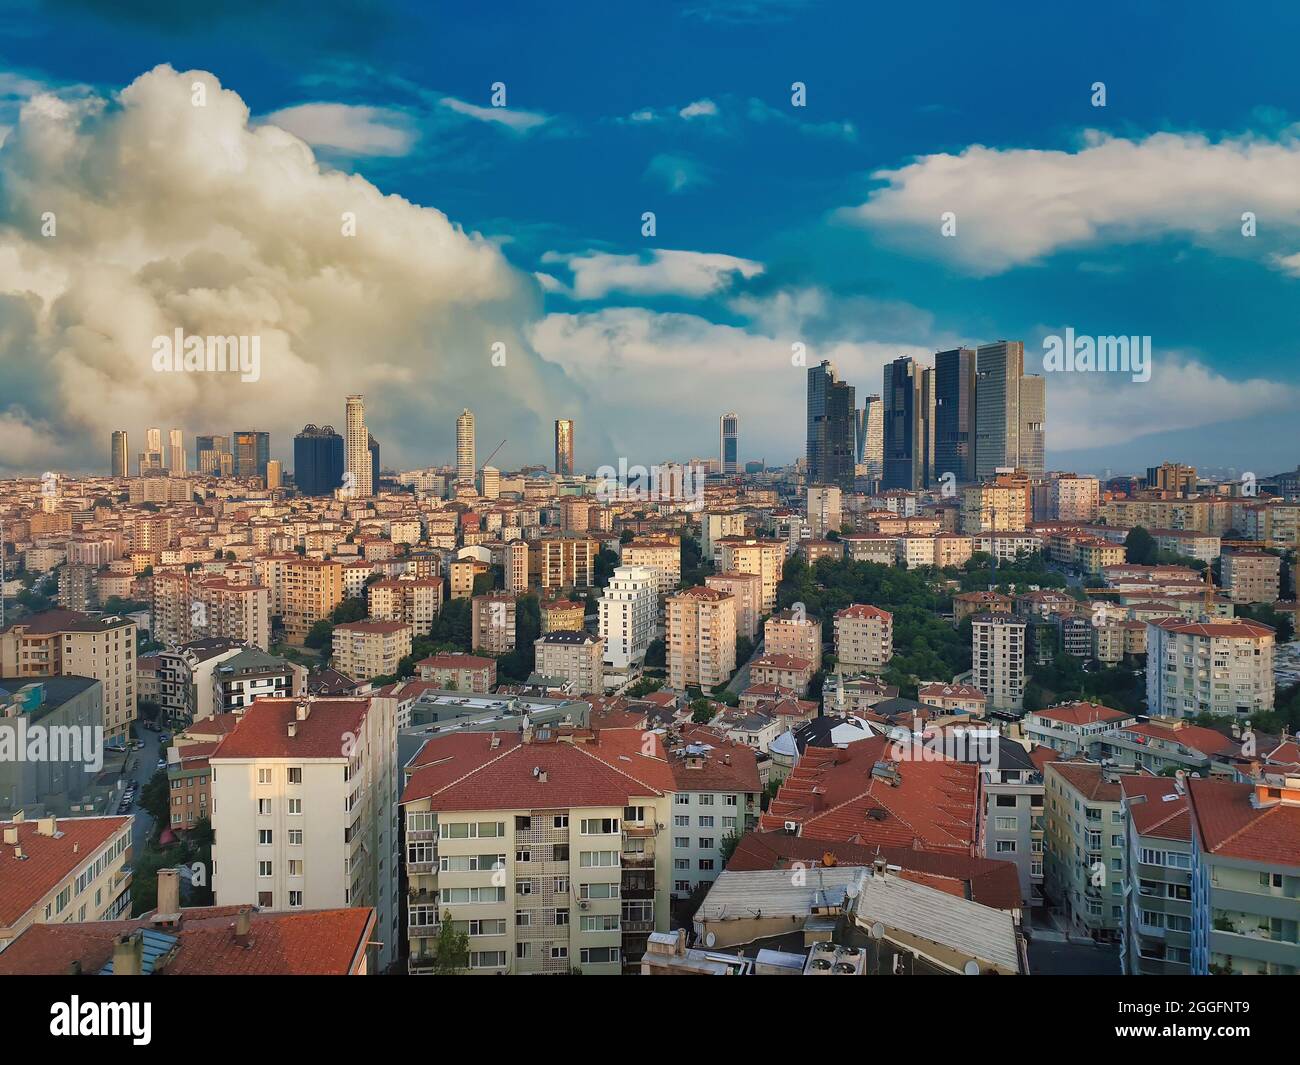 Intense urban sprawl and population growth make Istanbul one of the hardest cities to live in. Chaotic urbanisation in Istanbul. Stock Photo